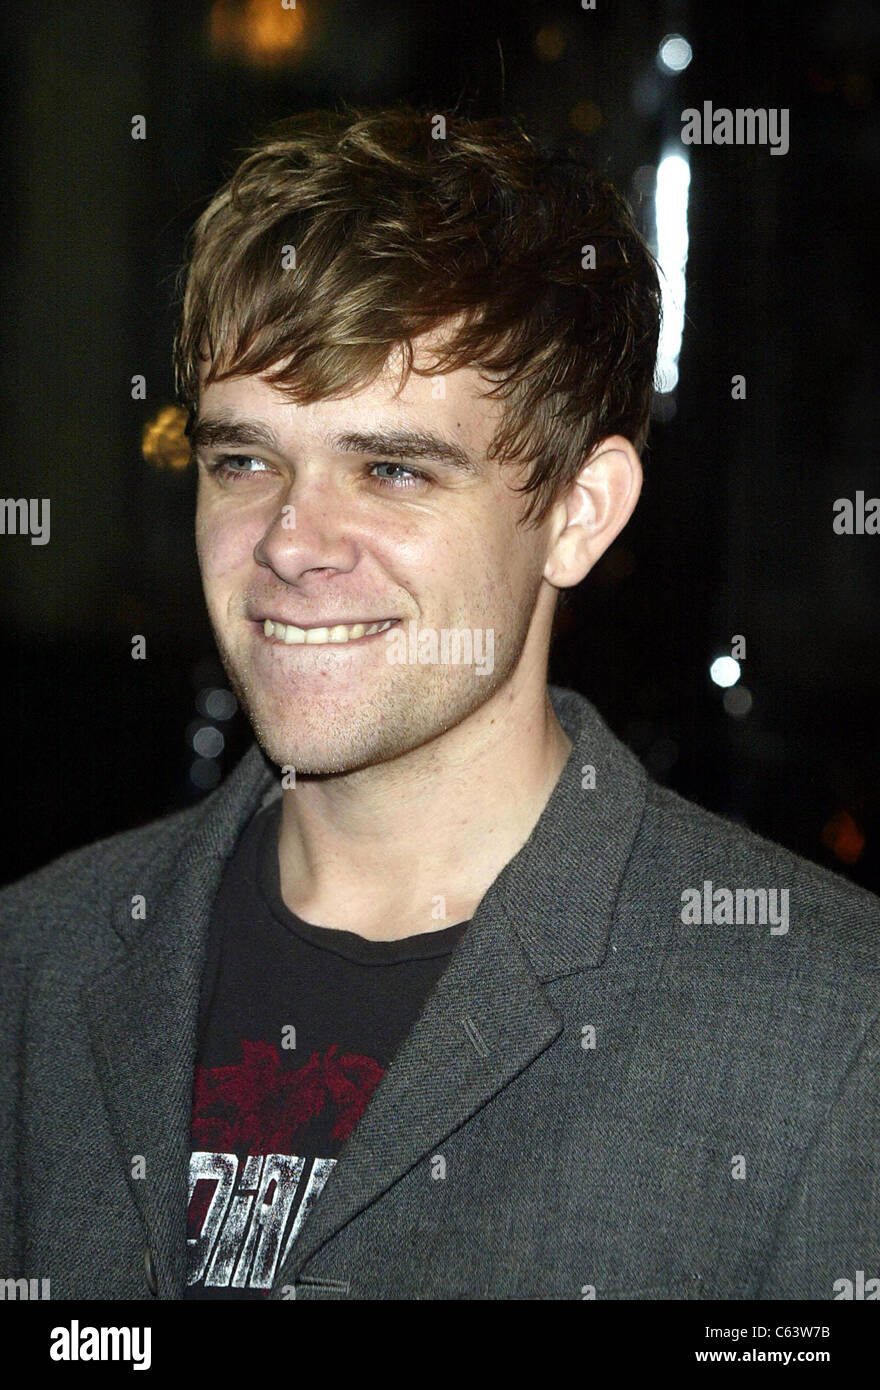 Nick Stahl at HBO Carnivale 2nd Season Premiere Party, Los Angeles, CA January 06, 2005. Photo by: Emilio Flores/Everett Collection Stock Photo